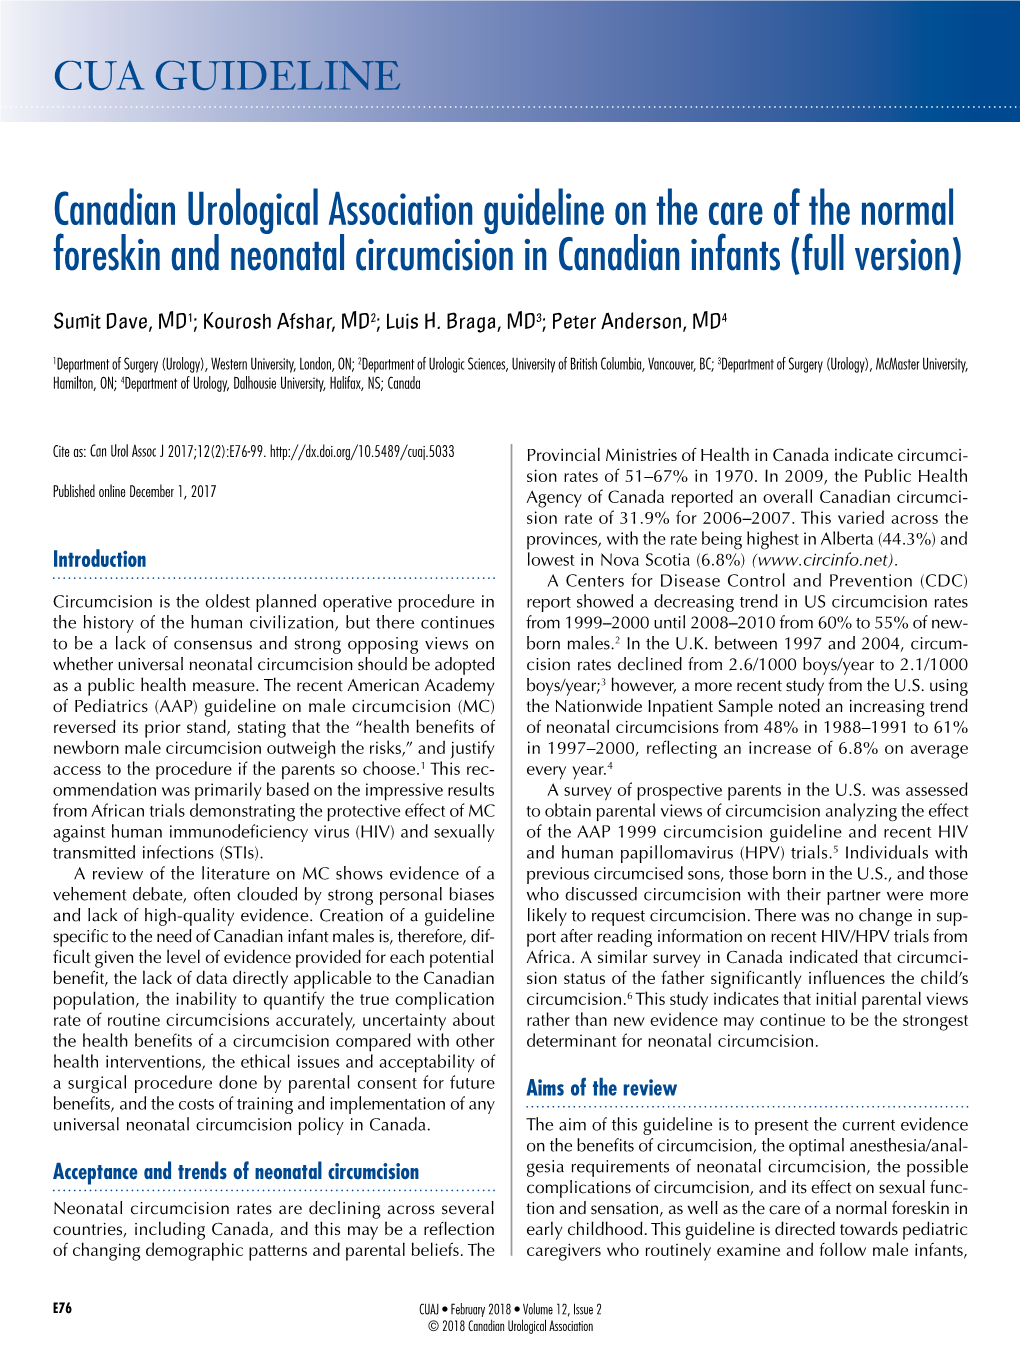 Canadian Urological Association Guideline on the Care of the Normal Foreskin and Neonatal Circumcision in Canadian Infants (Full Version)